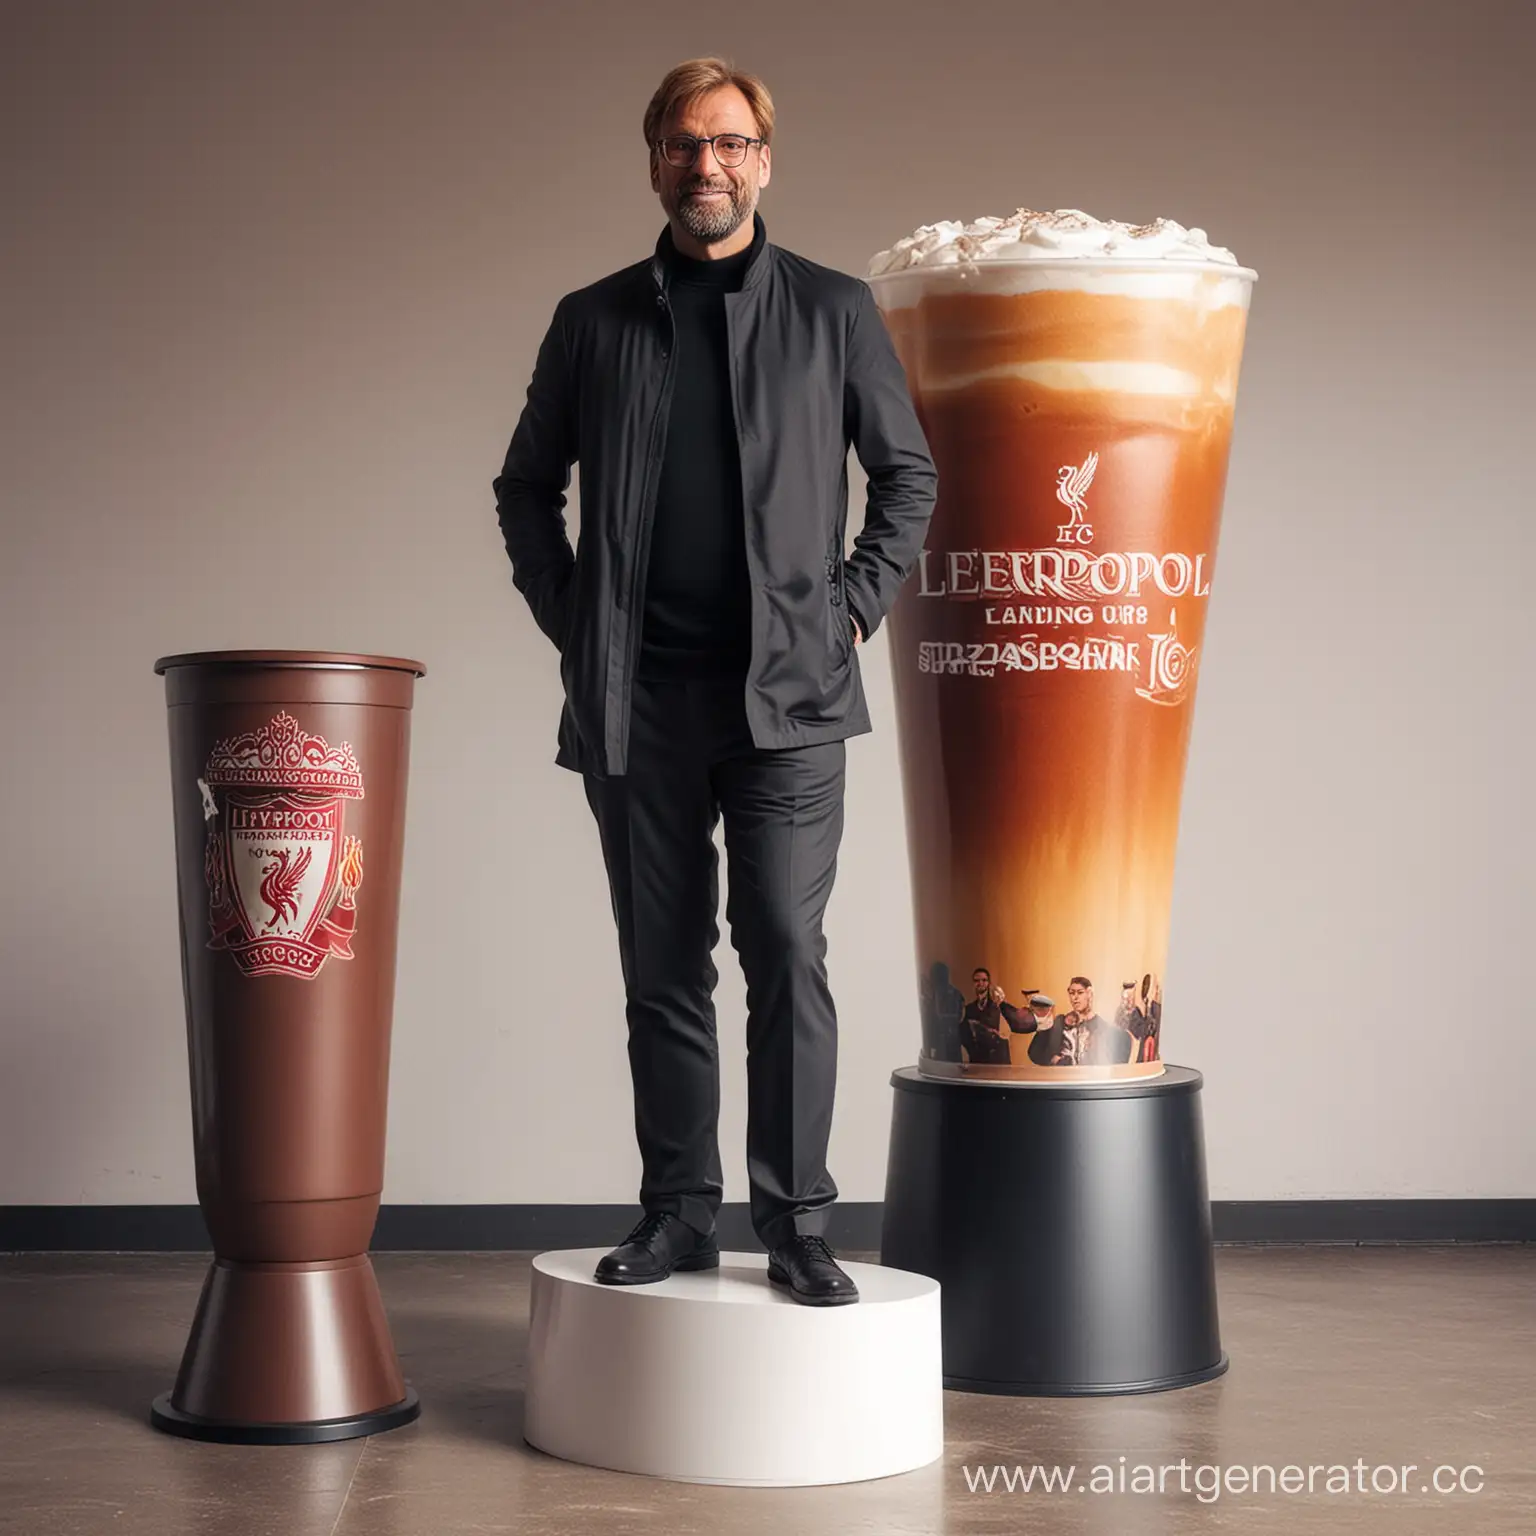 Jurgen-Klopp-with-Giant-Coffee-Cup-Liverpool-FC-Manager-Portrait